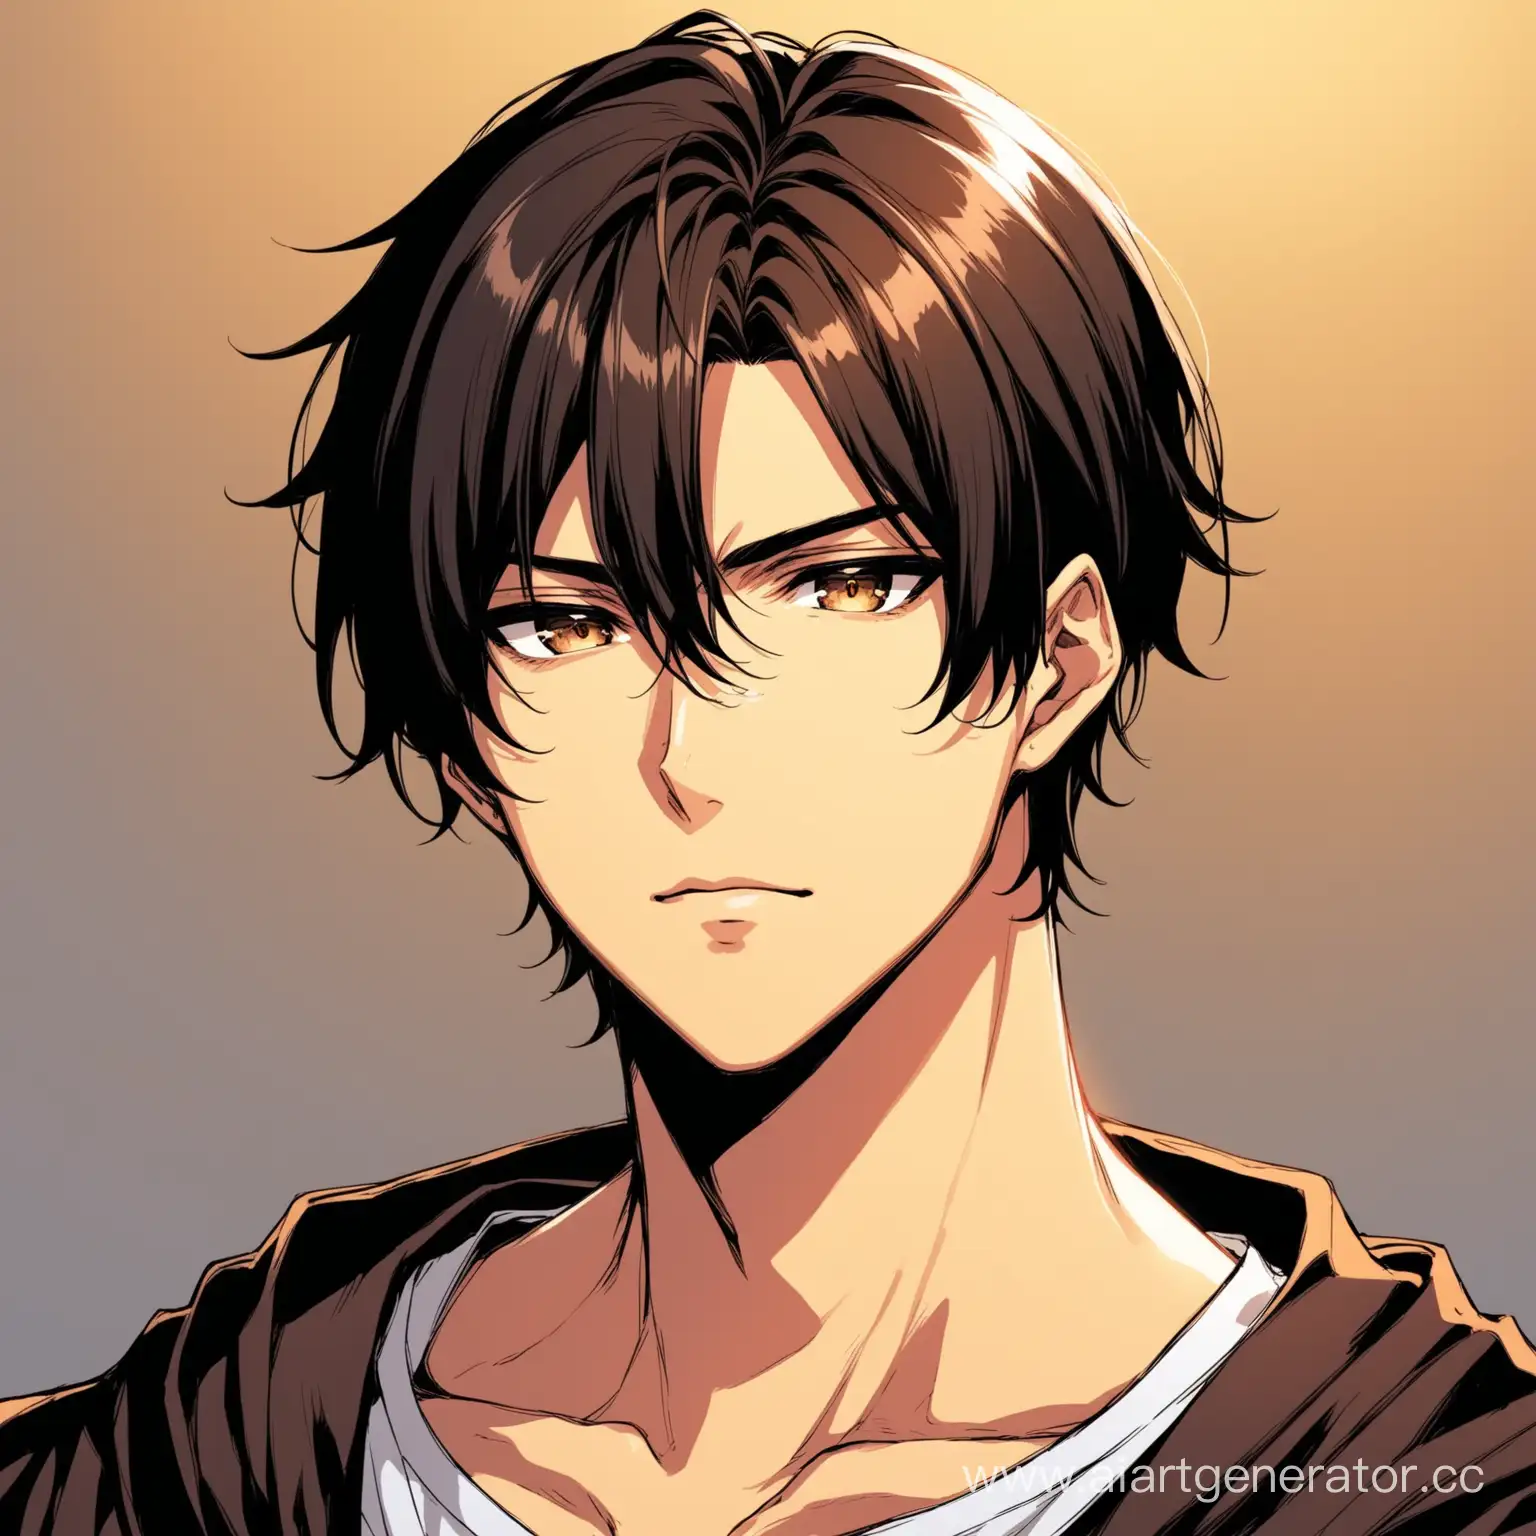 Mysterious-Man-with-Elongated-Wavy-Hair-and-Piercing-Gaze-Enigmatic-Portraiture-Inspired-by-Manhwa